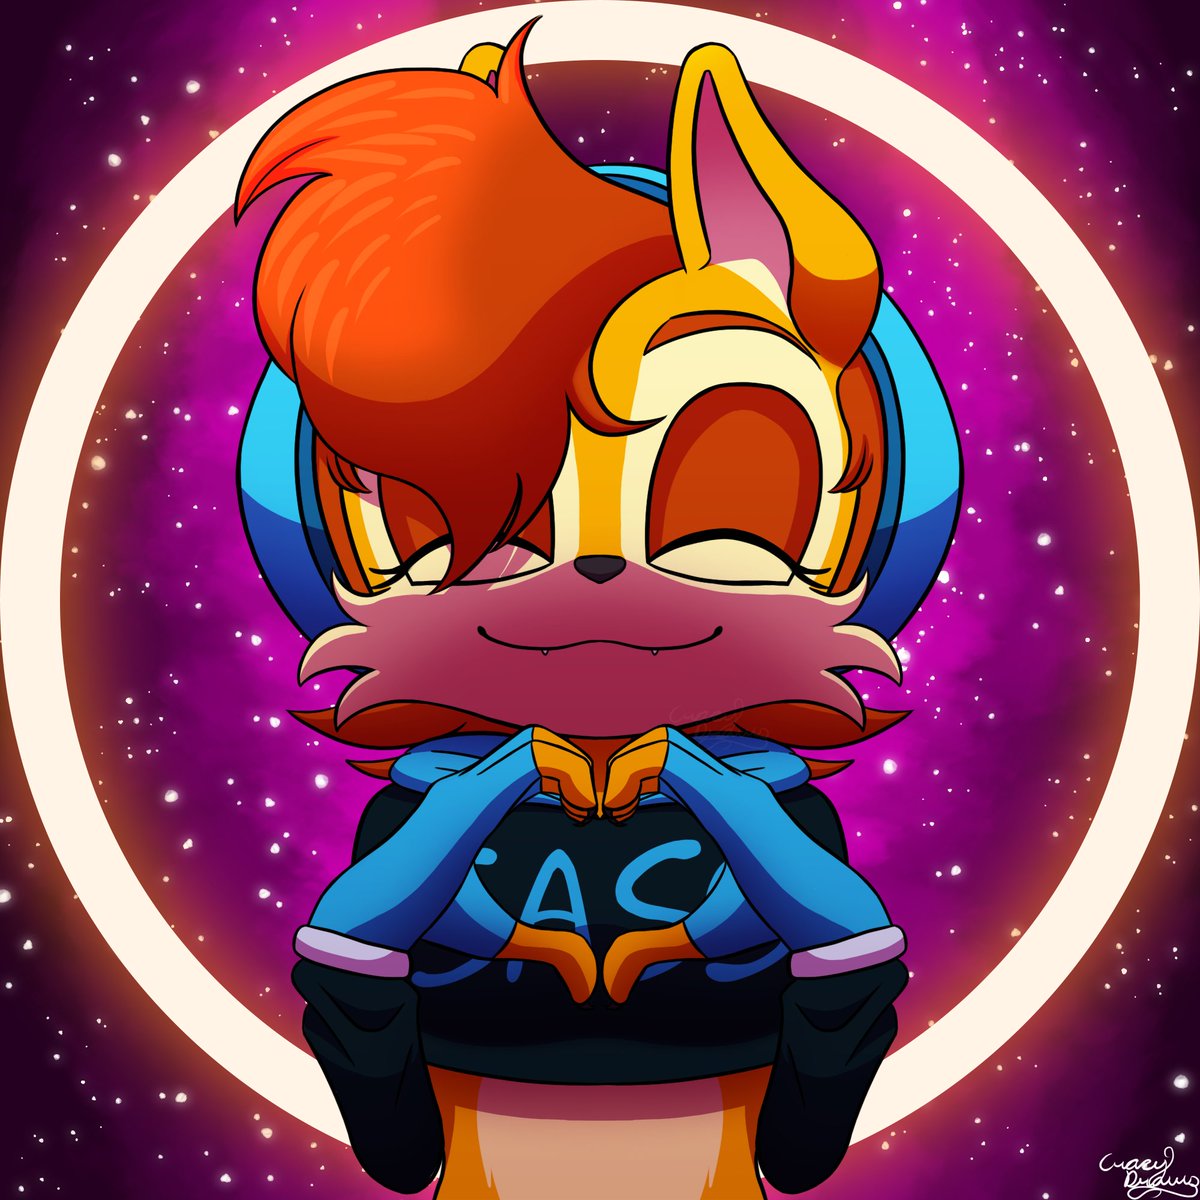 New pfp for my Sally Acorn channel and my @Sally_YT_Real account! 